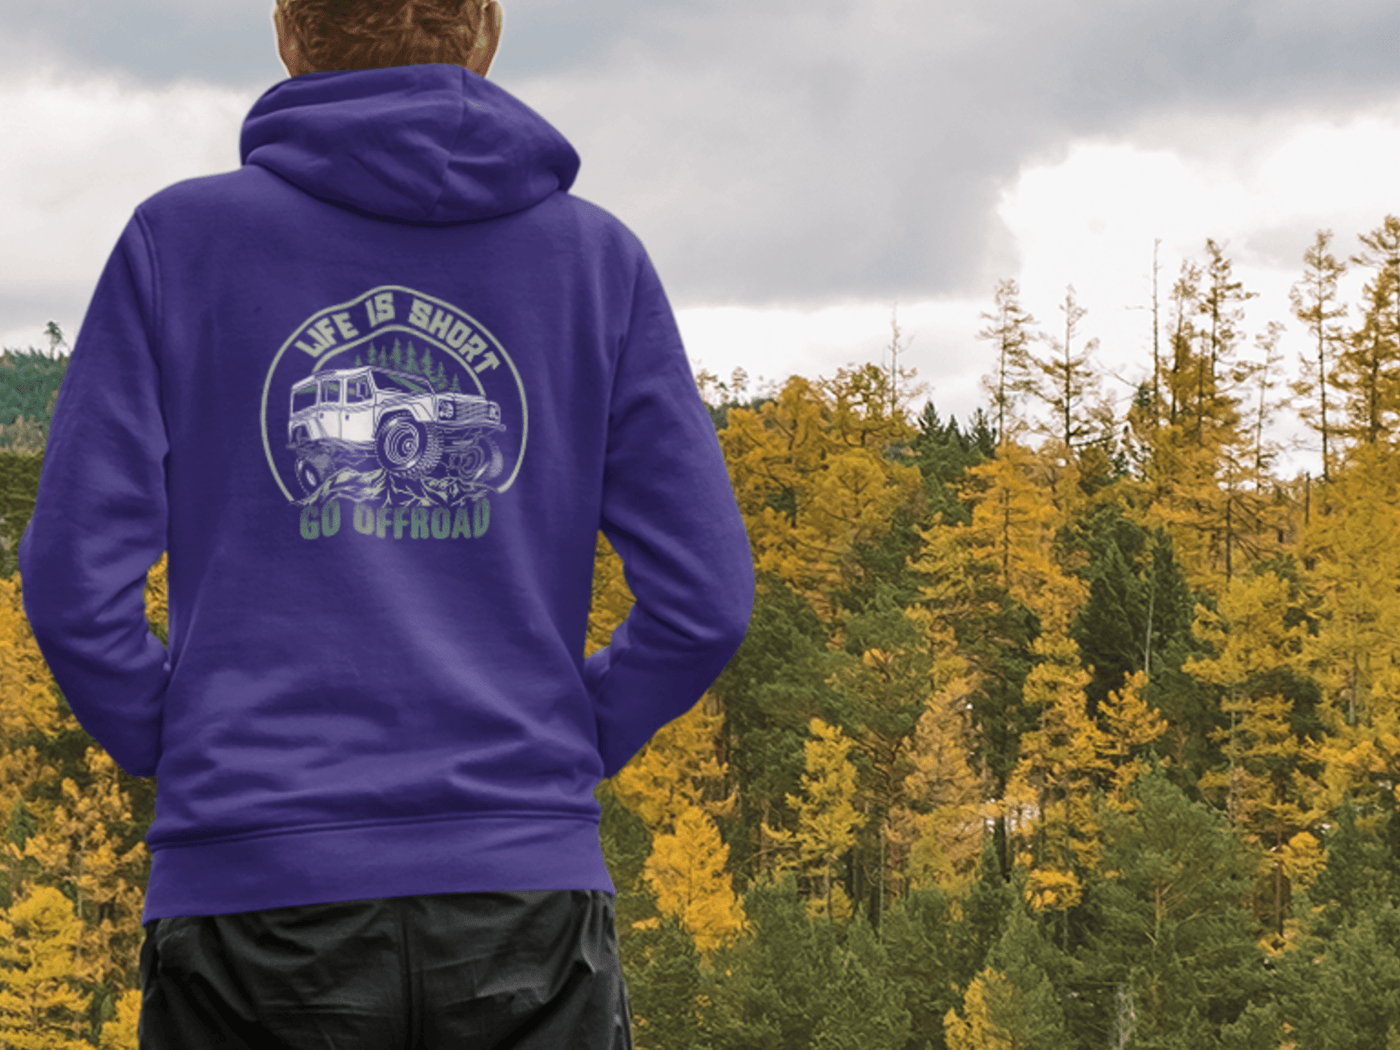 Life is Short Go Offroad Hoodie - Goats Trail Off-Road Apparel Company